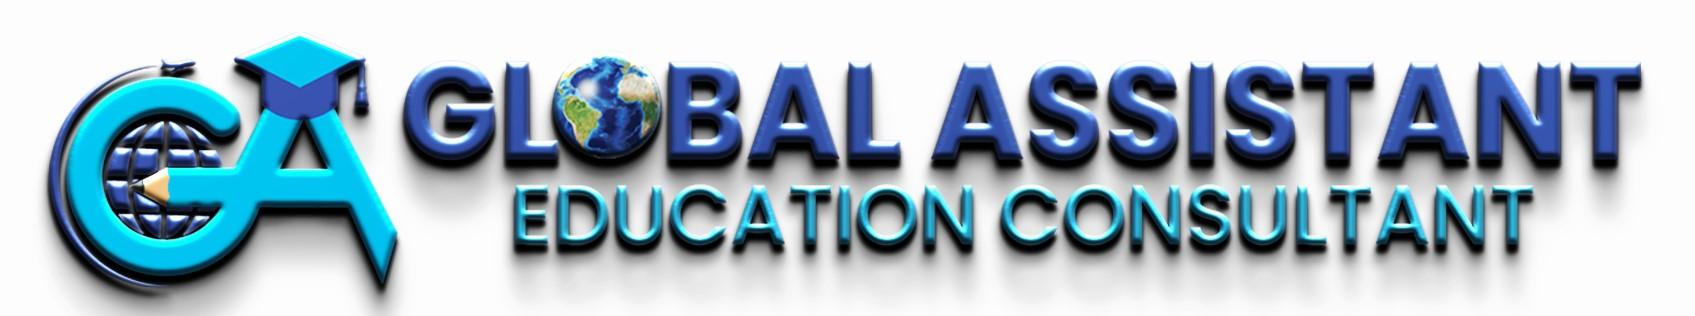 Global Assistant Best Education Consultant About Us